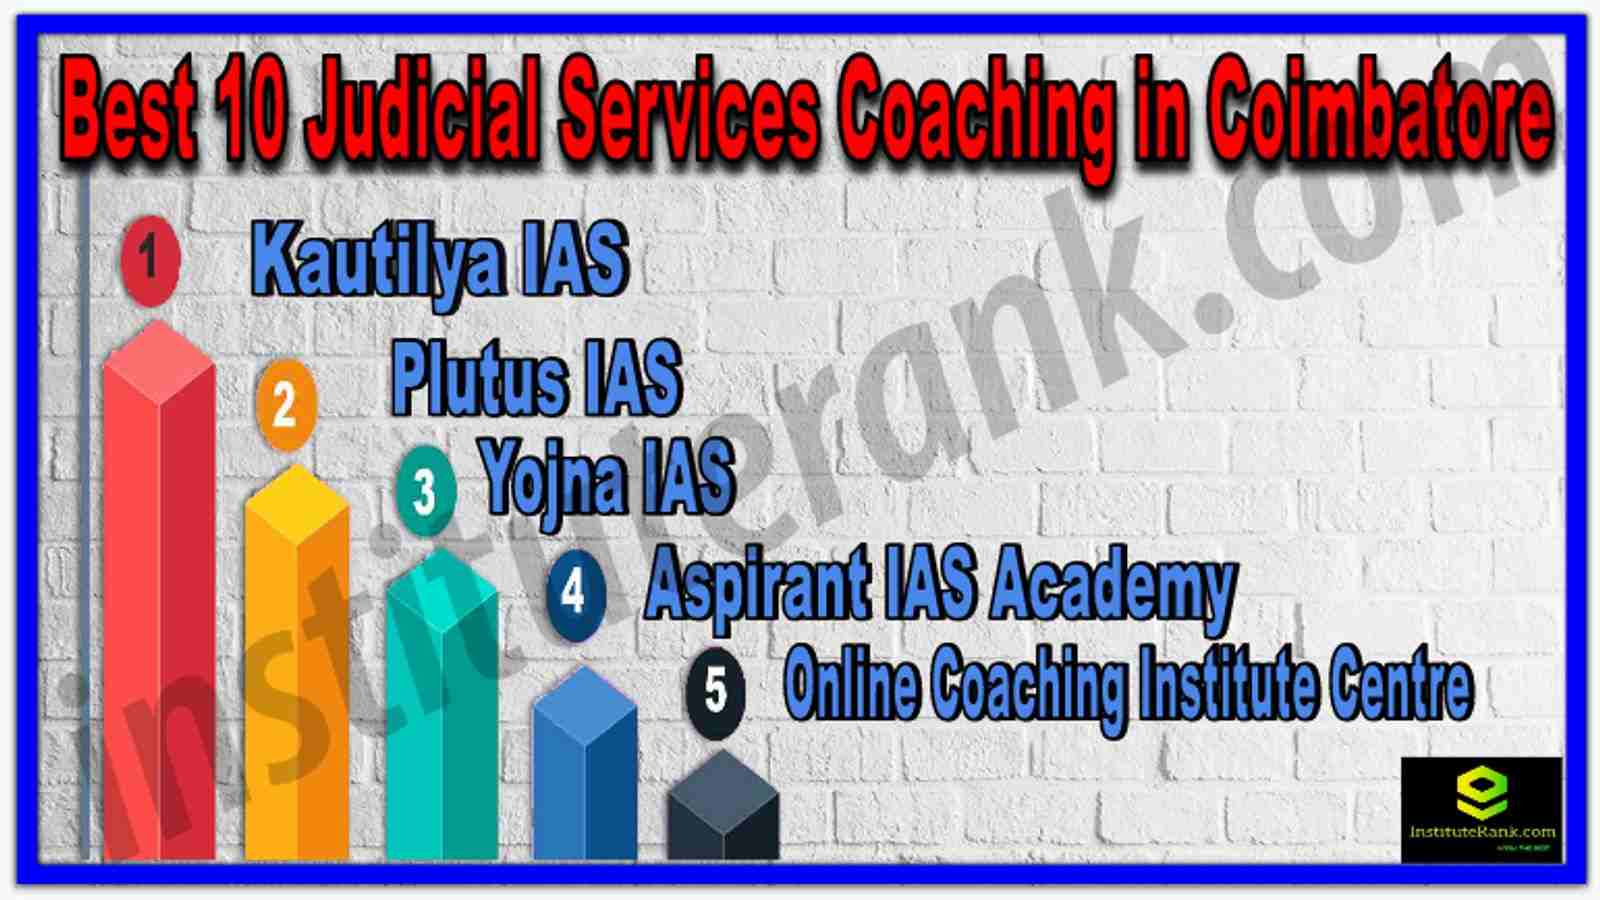 Best 10 Judicial Services Coaching in Coimbatore